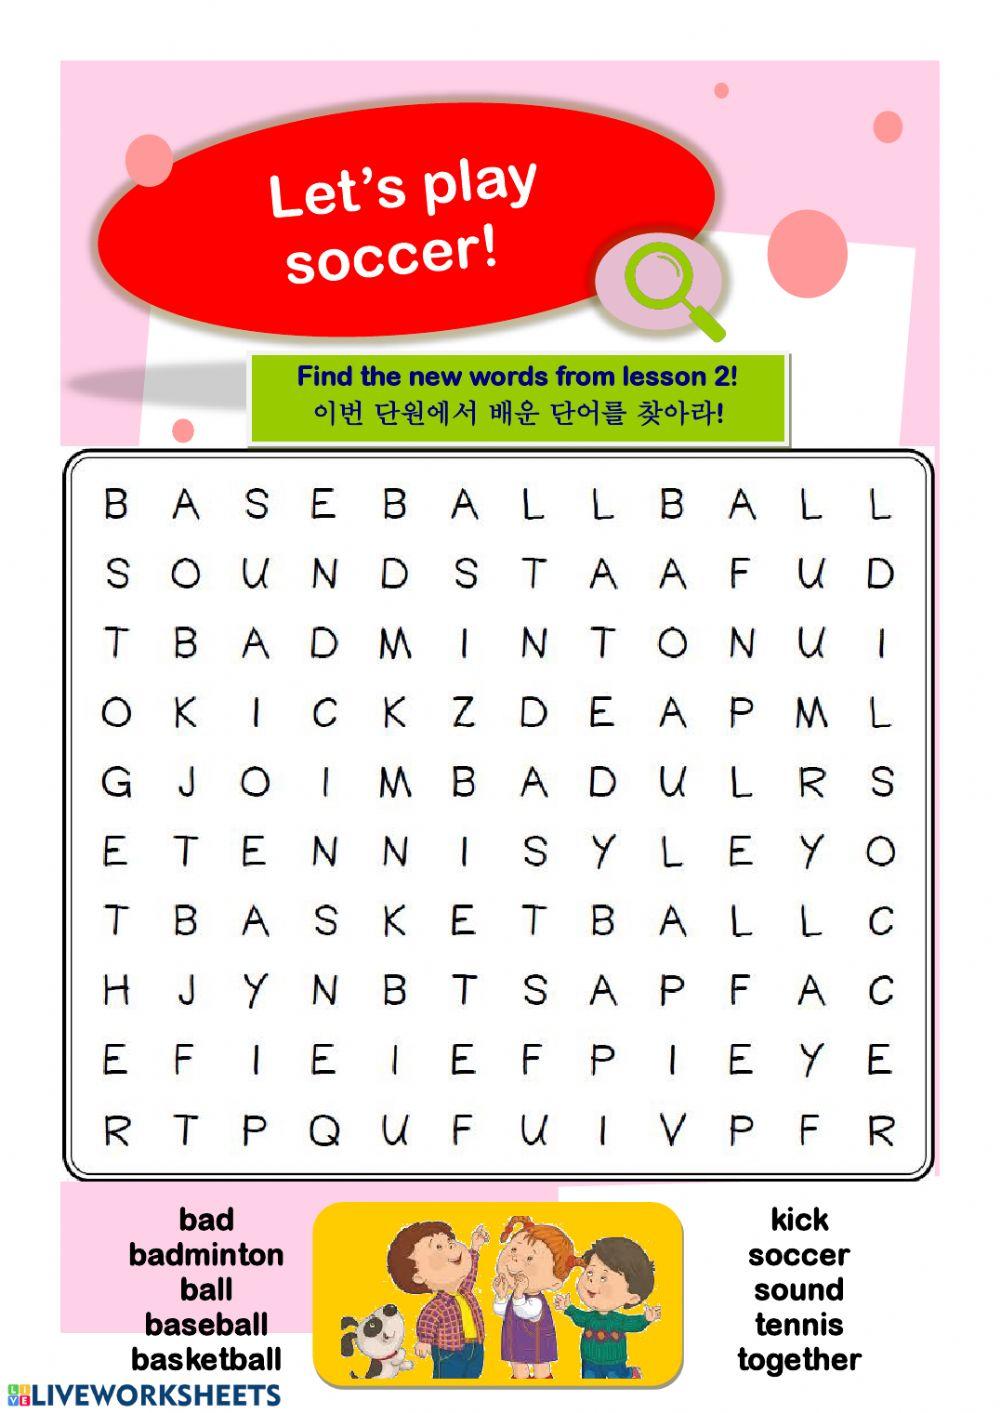 Let's play soccer! vocabulary wordsearch